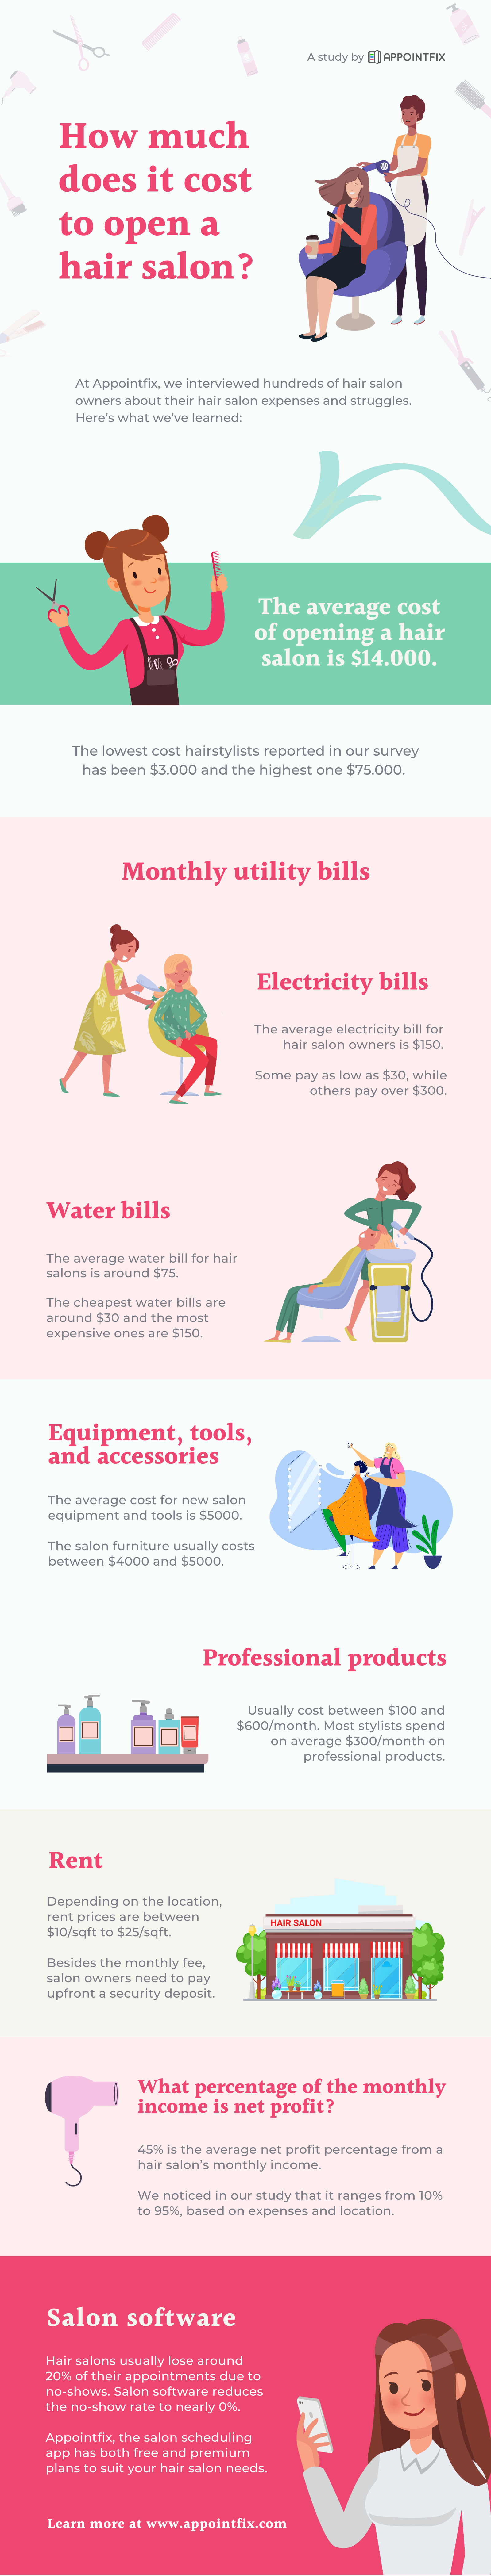 How Much Does It Cost To Open Or Run A Hair Salon?